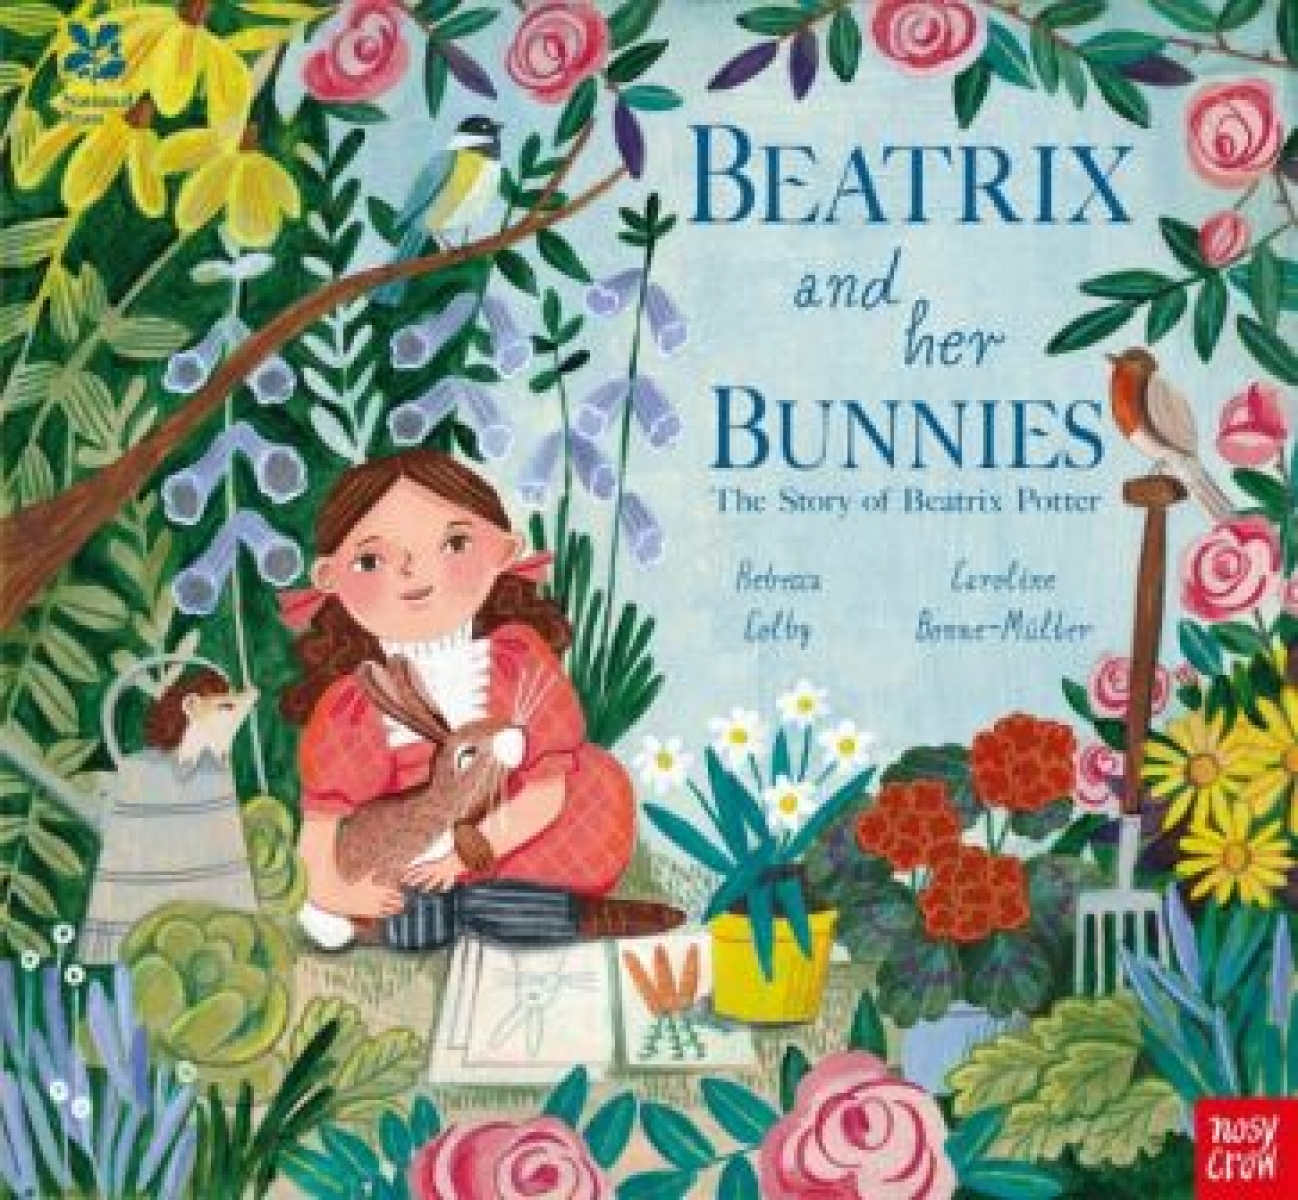 Rebecca Colby National Trust: Beatrix and her Bunnies 